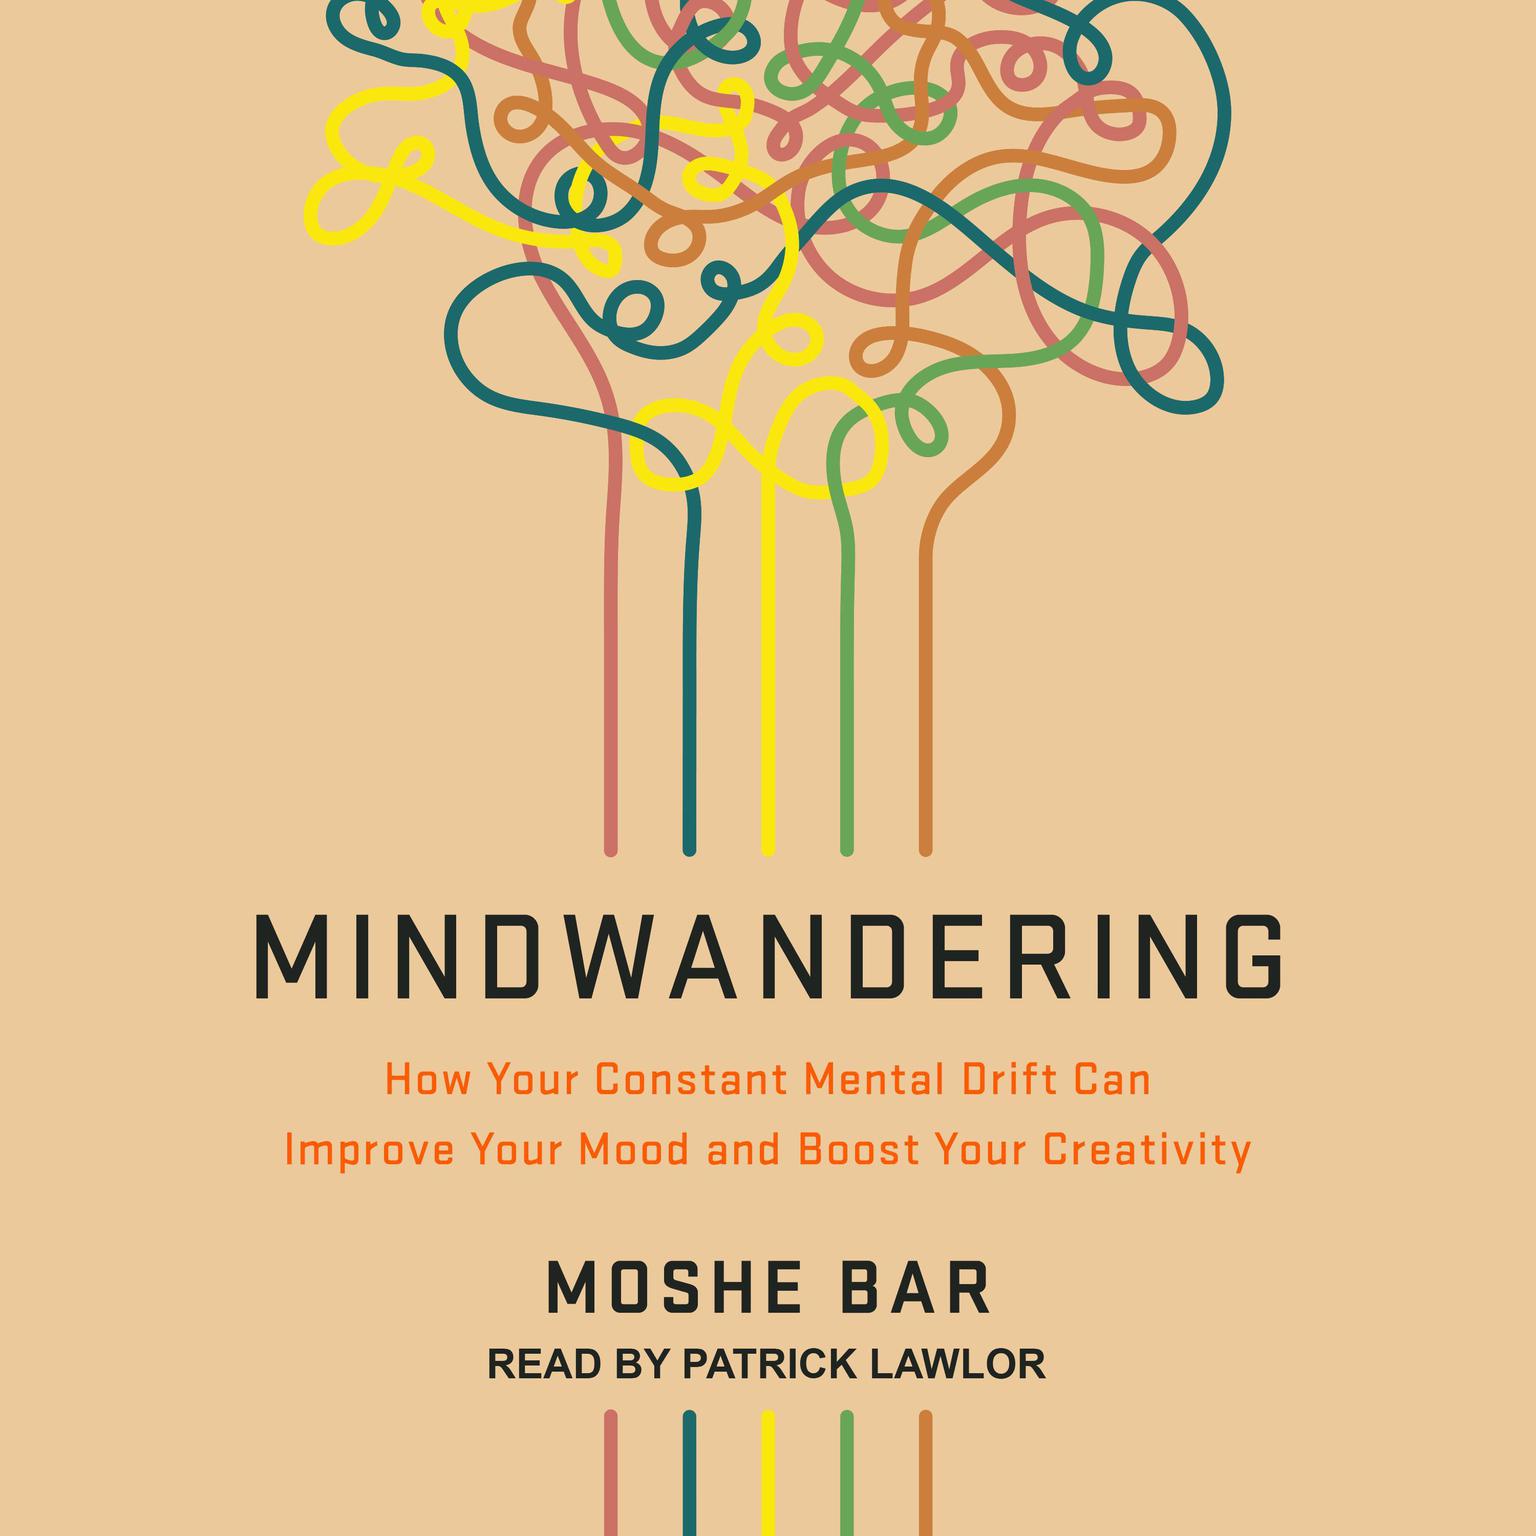 Mindwandering: How Your Constant Mental Drift Can Improve Your Mood and Boost Your Creativity Audiobook, by Moshe Bar